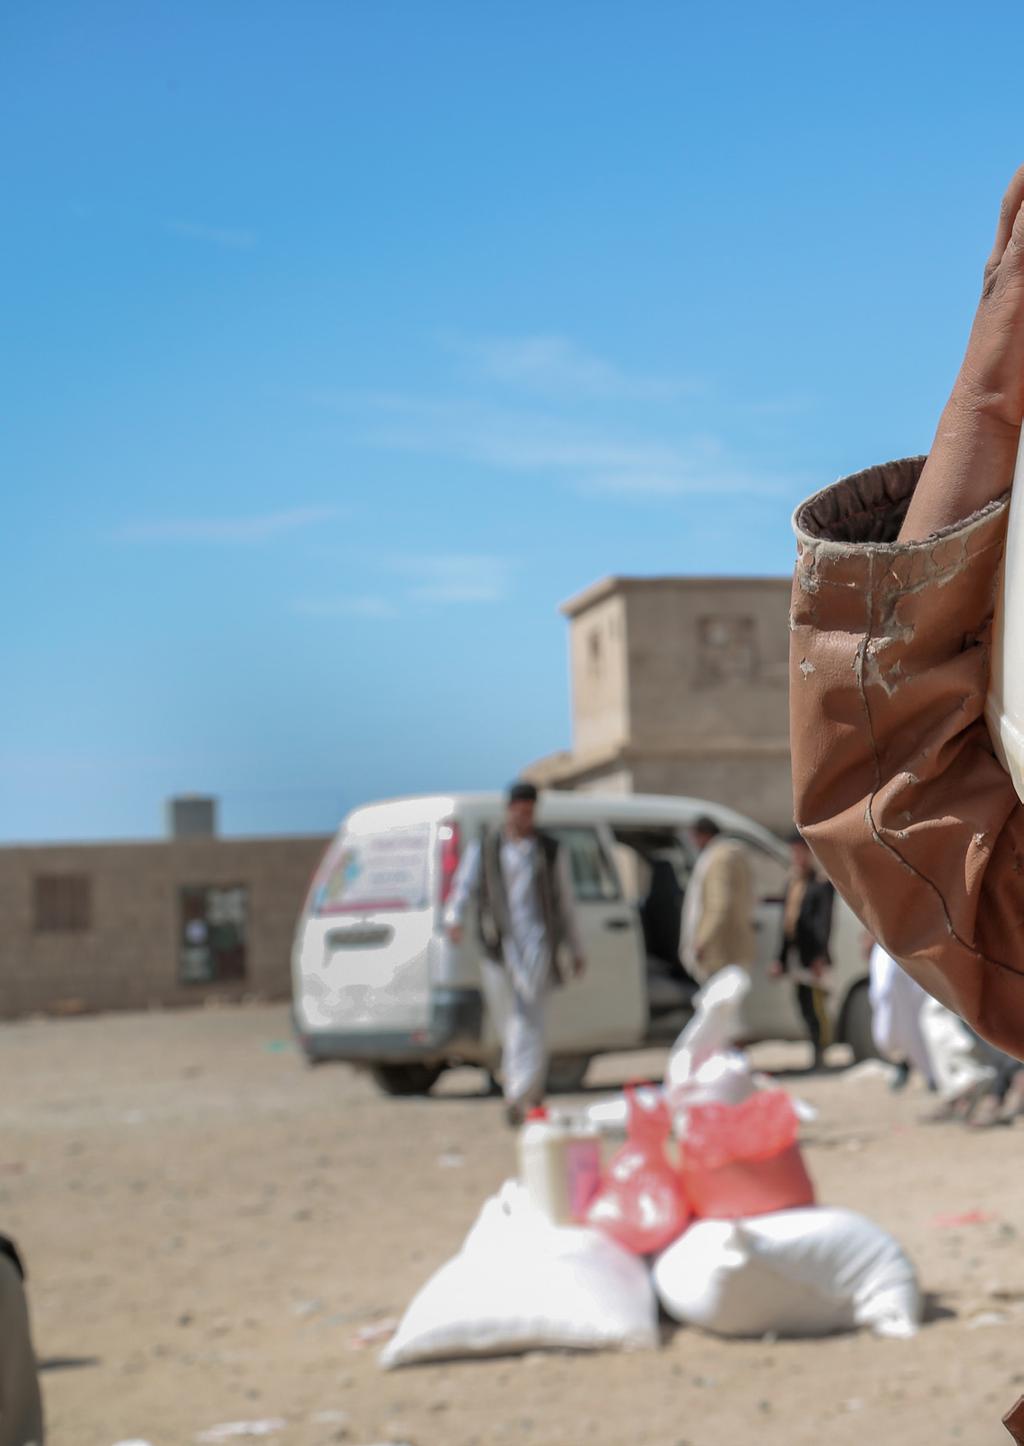 Emergency Food Assistance Through WFP Partnership The United Nations World Food Programme (WFP) has continued to partner with Islamic Relief in Yemen, enabling us to mobilize and distribute food